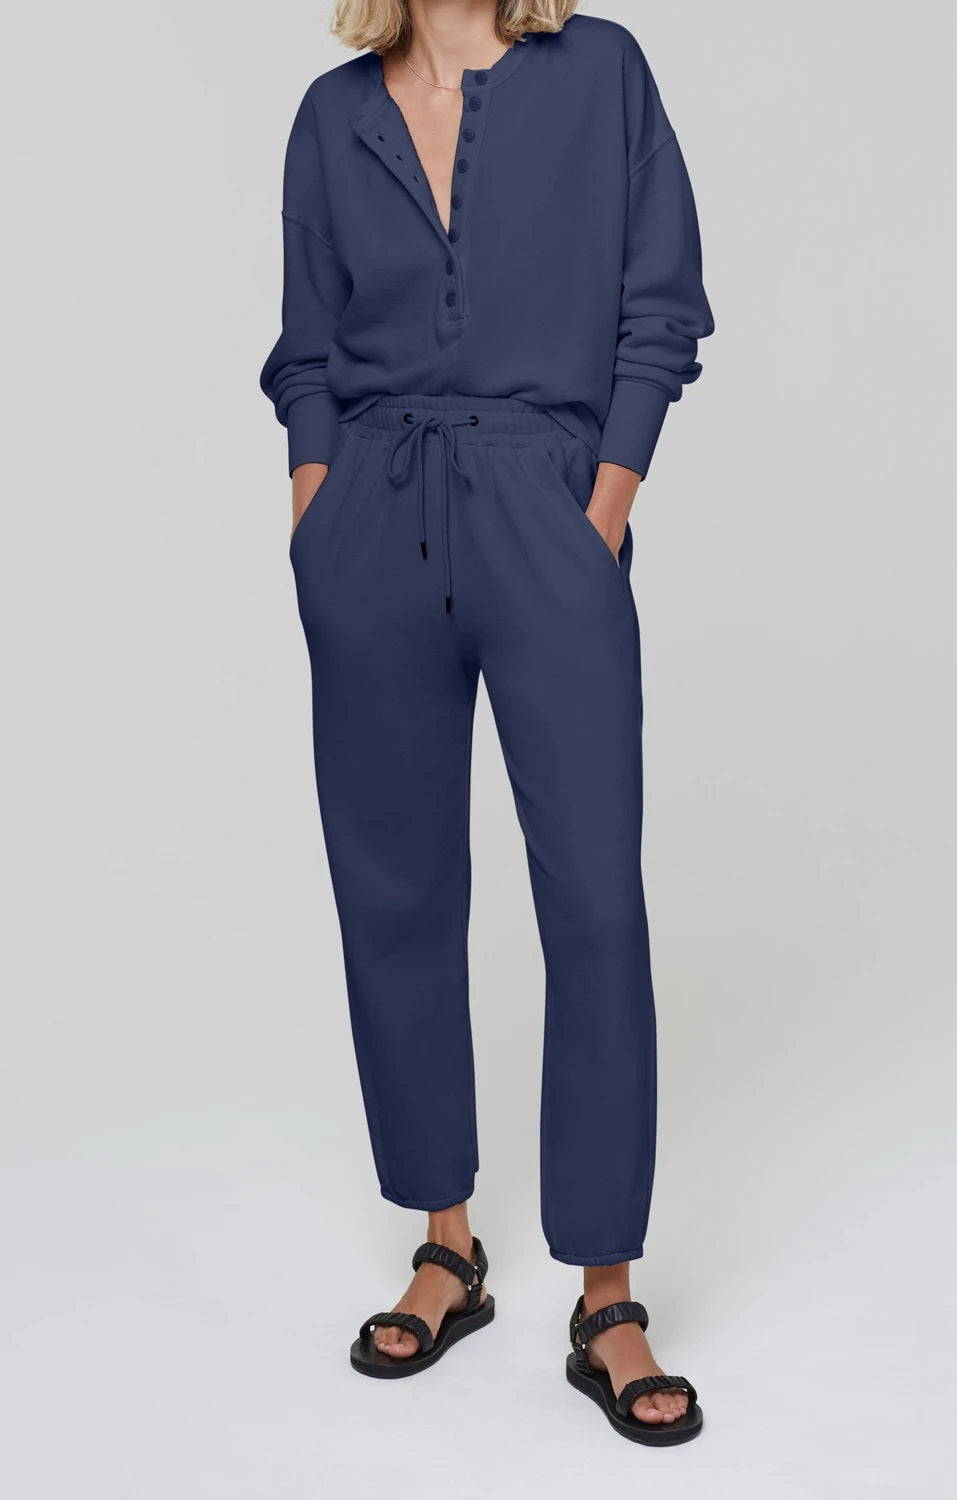 Citizens of Humanity - Laila Fleece Pant in Navy